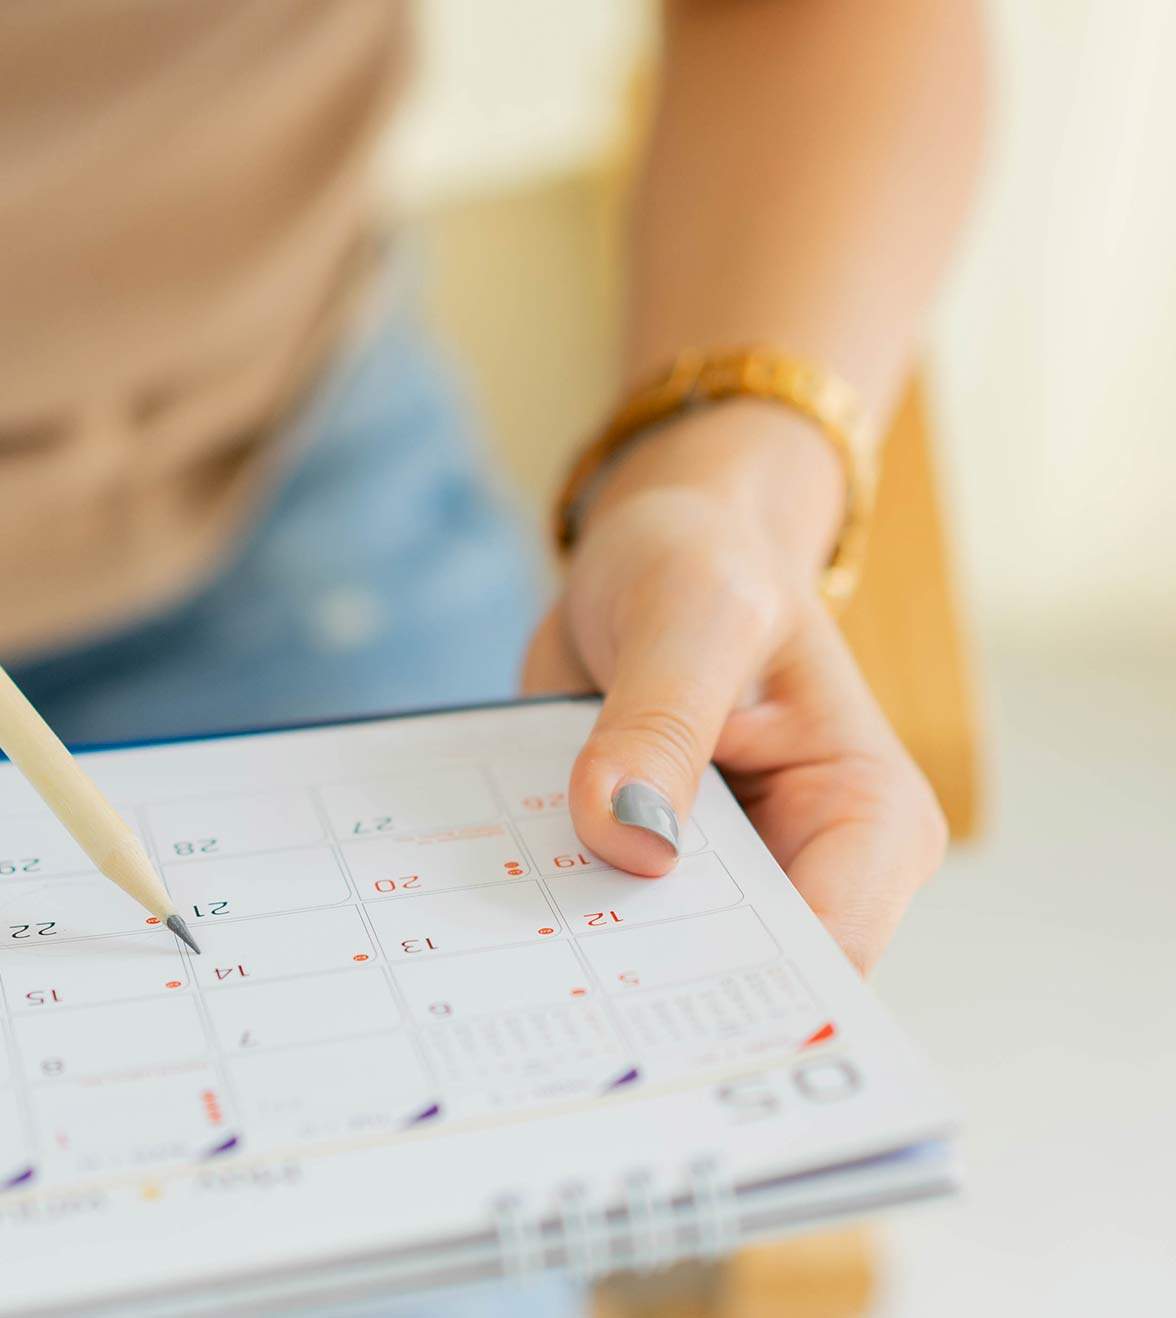 A woman holds a pencil above a planner that shows the days of the month